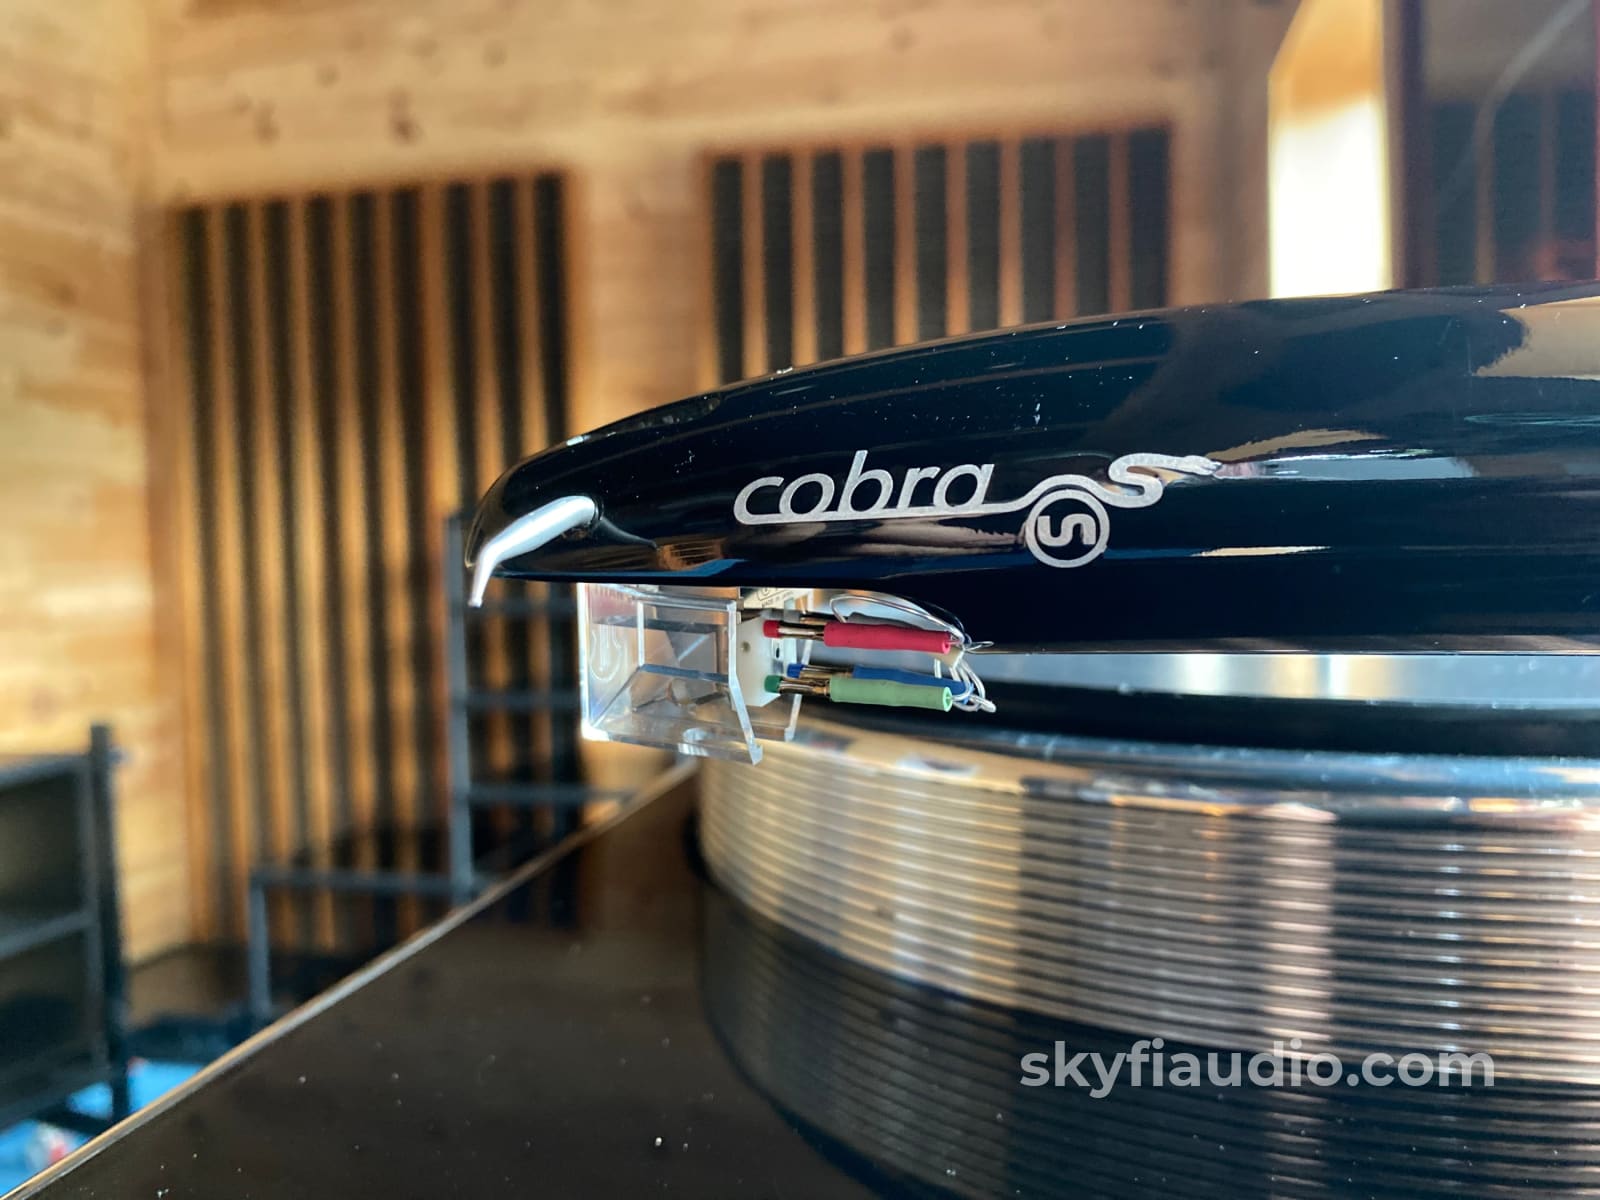 Michael Fremers Continuum Caliburn Turntable With Cobra Arm. Installed And Calibrated By The